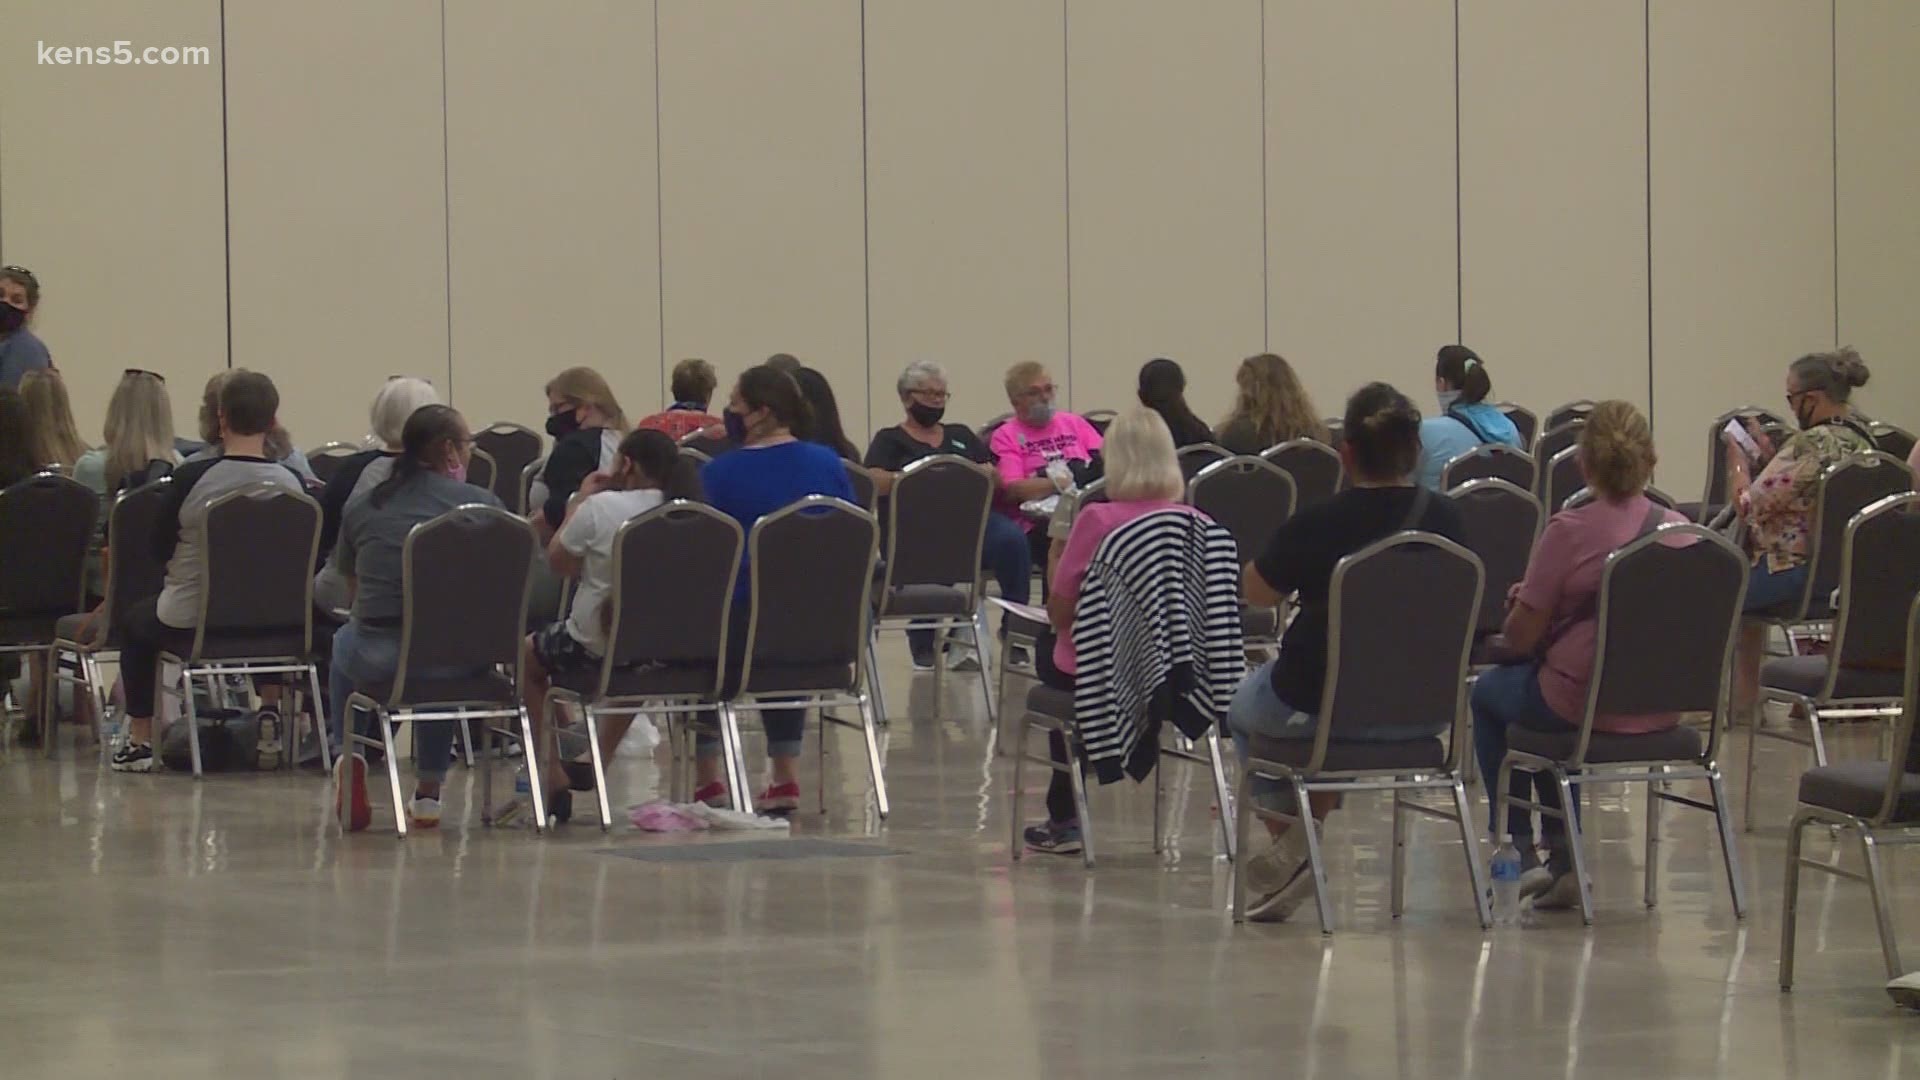 Around 1,300 are expected to attend the Women of Joy Conference this weekend, where they'll be expected to adhere to mask-wearing rules and temperature checks.